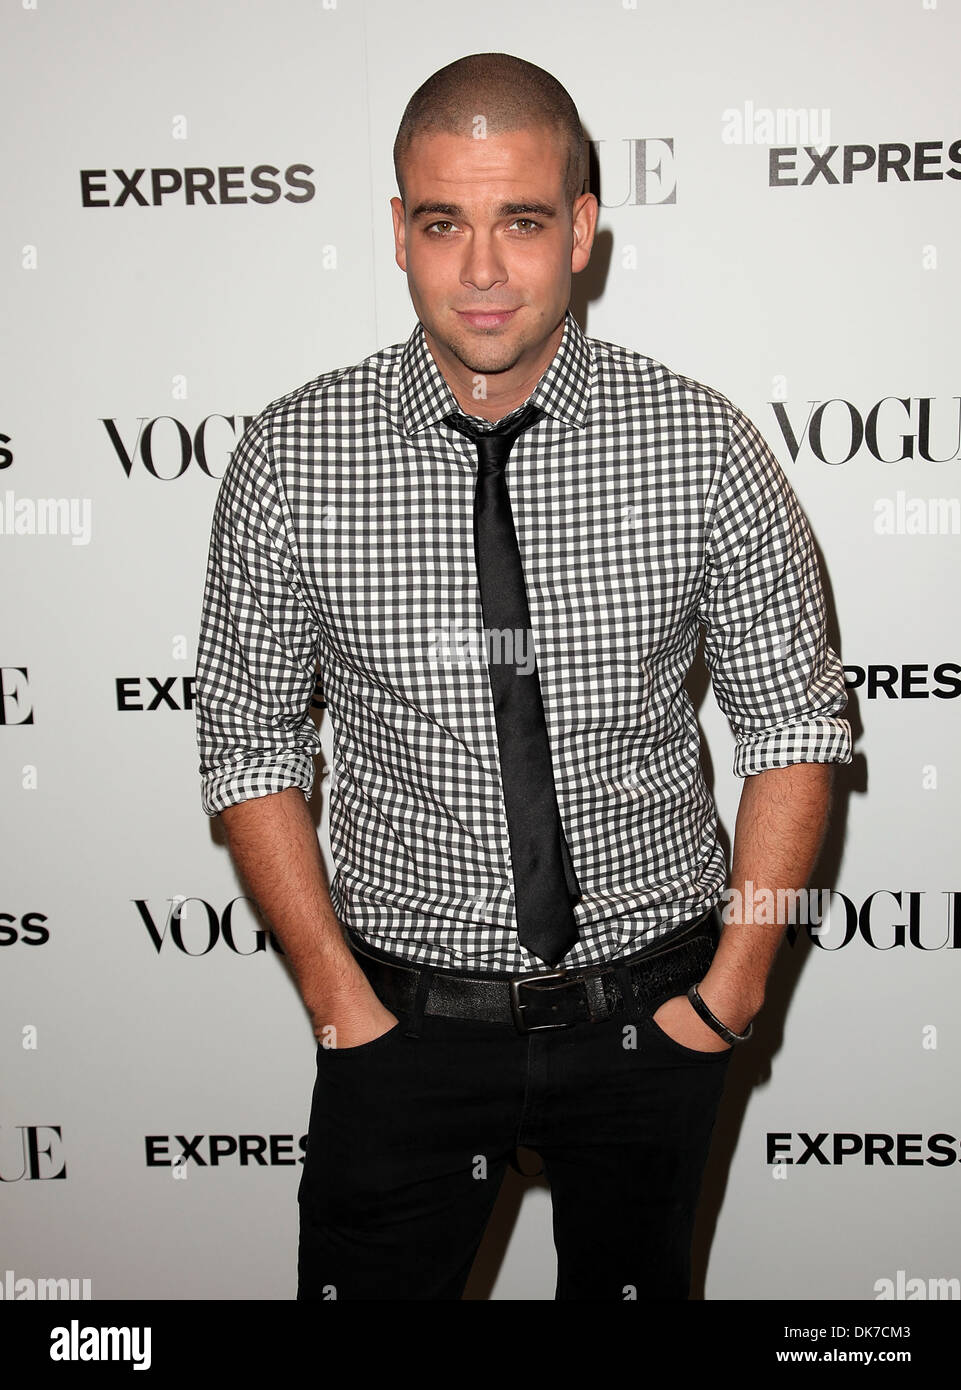 Mark Salling Express And Vogue Celebrate 'The Scenemakers' at Chateau Marmont Hollywood California - 27.09.12 Stock Photo